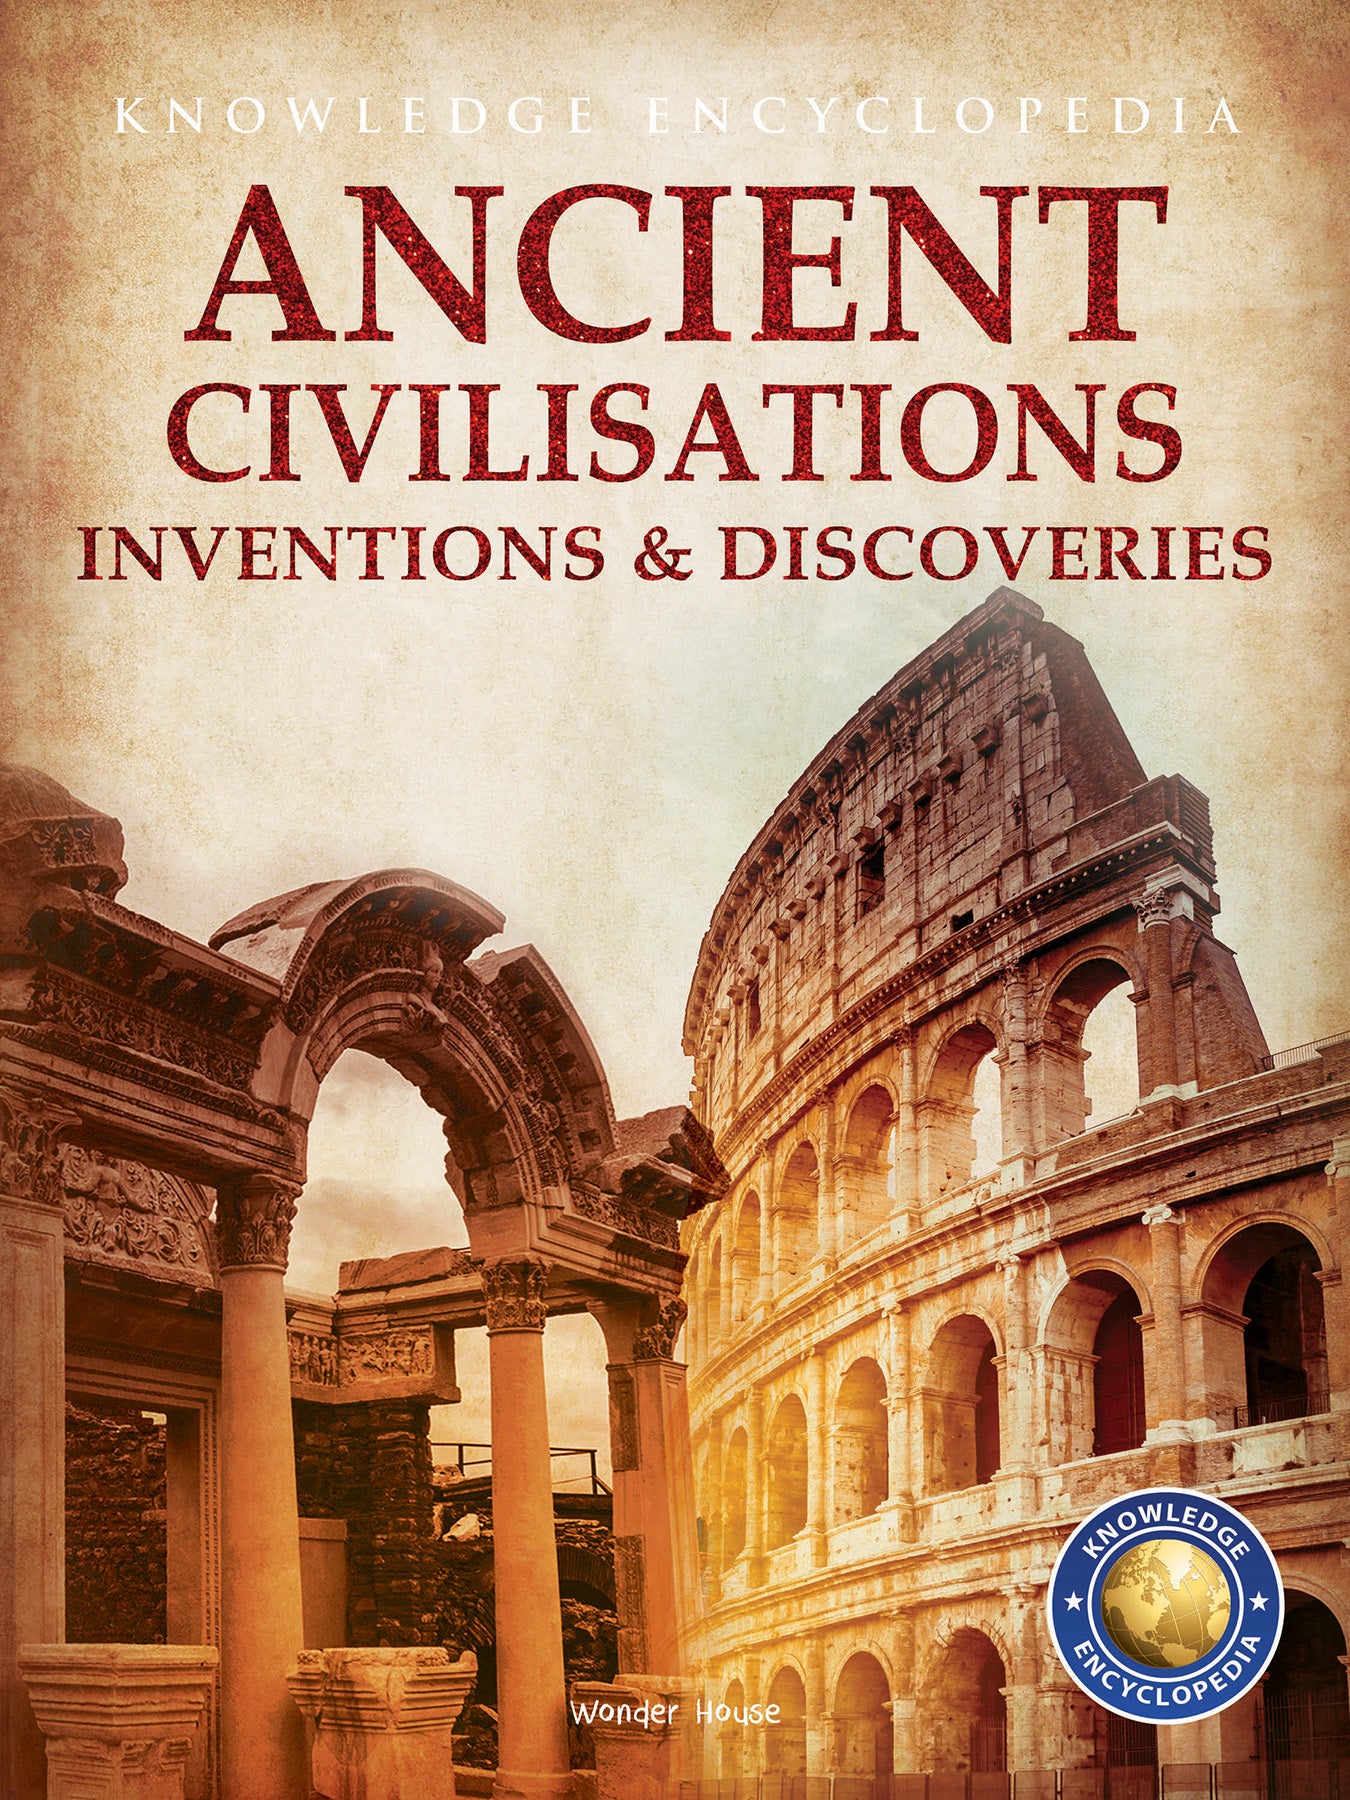 Inventions & Discoveries - Ancient Civilisation: Knowledge Encyclopedia For Children